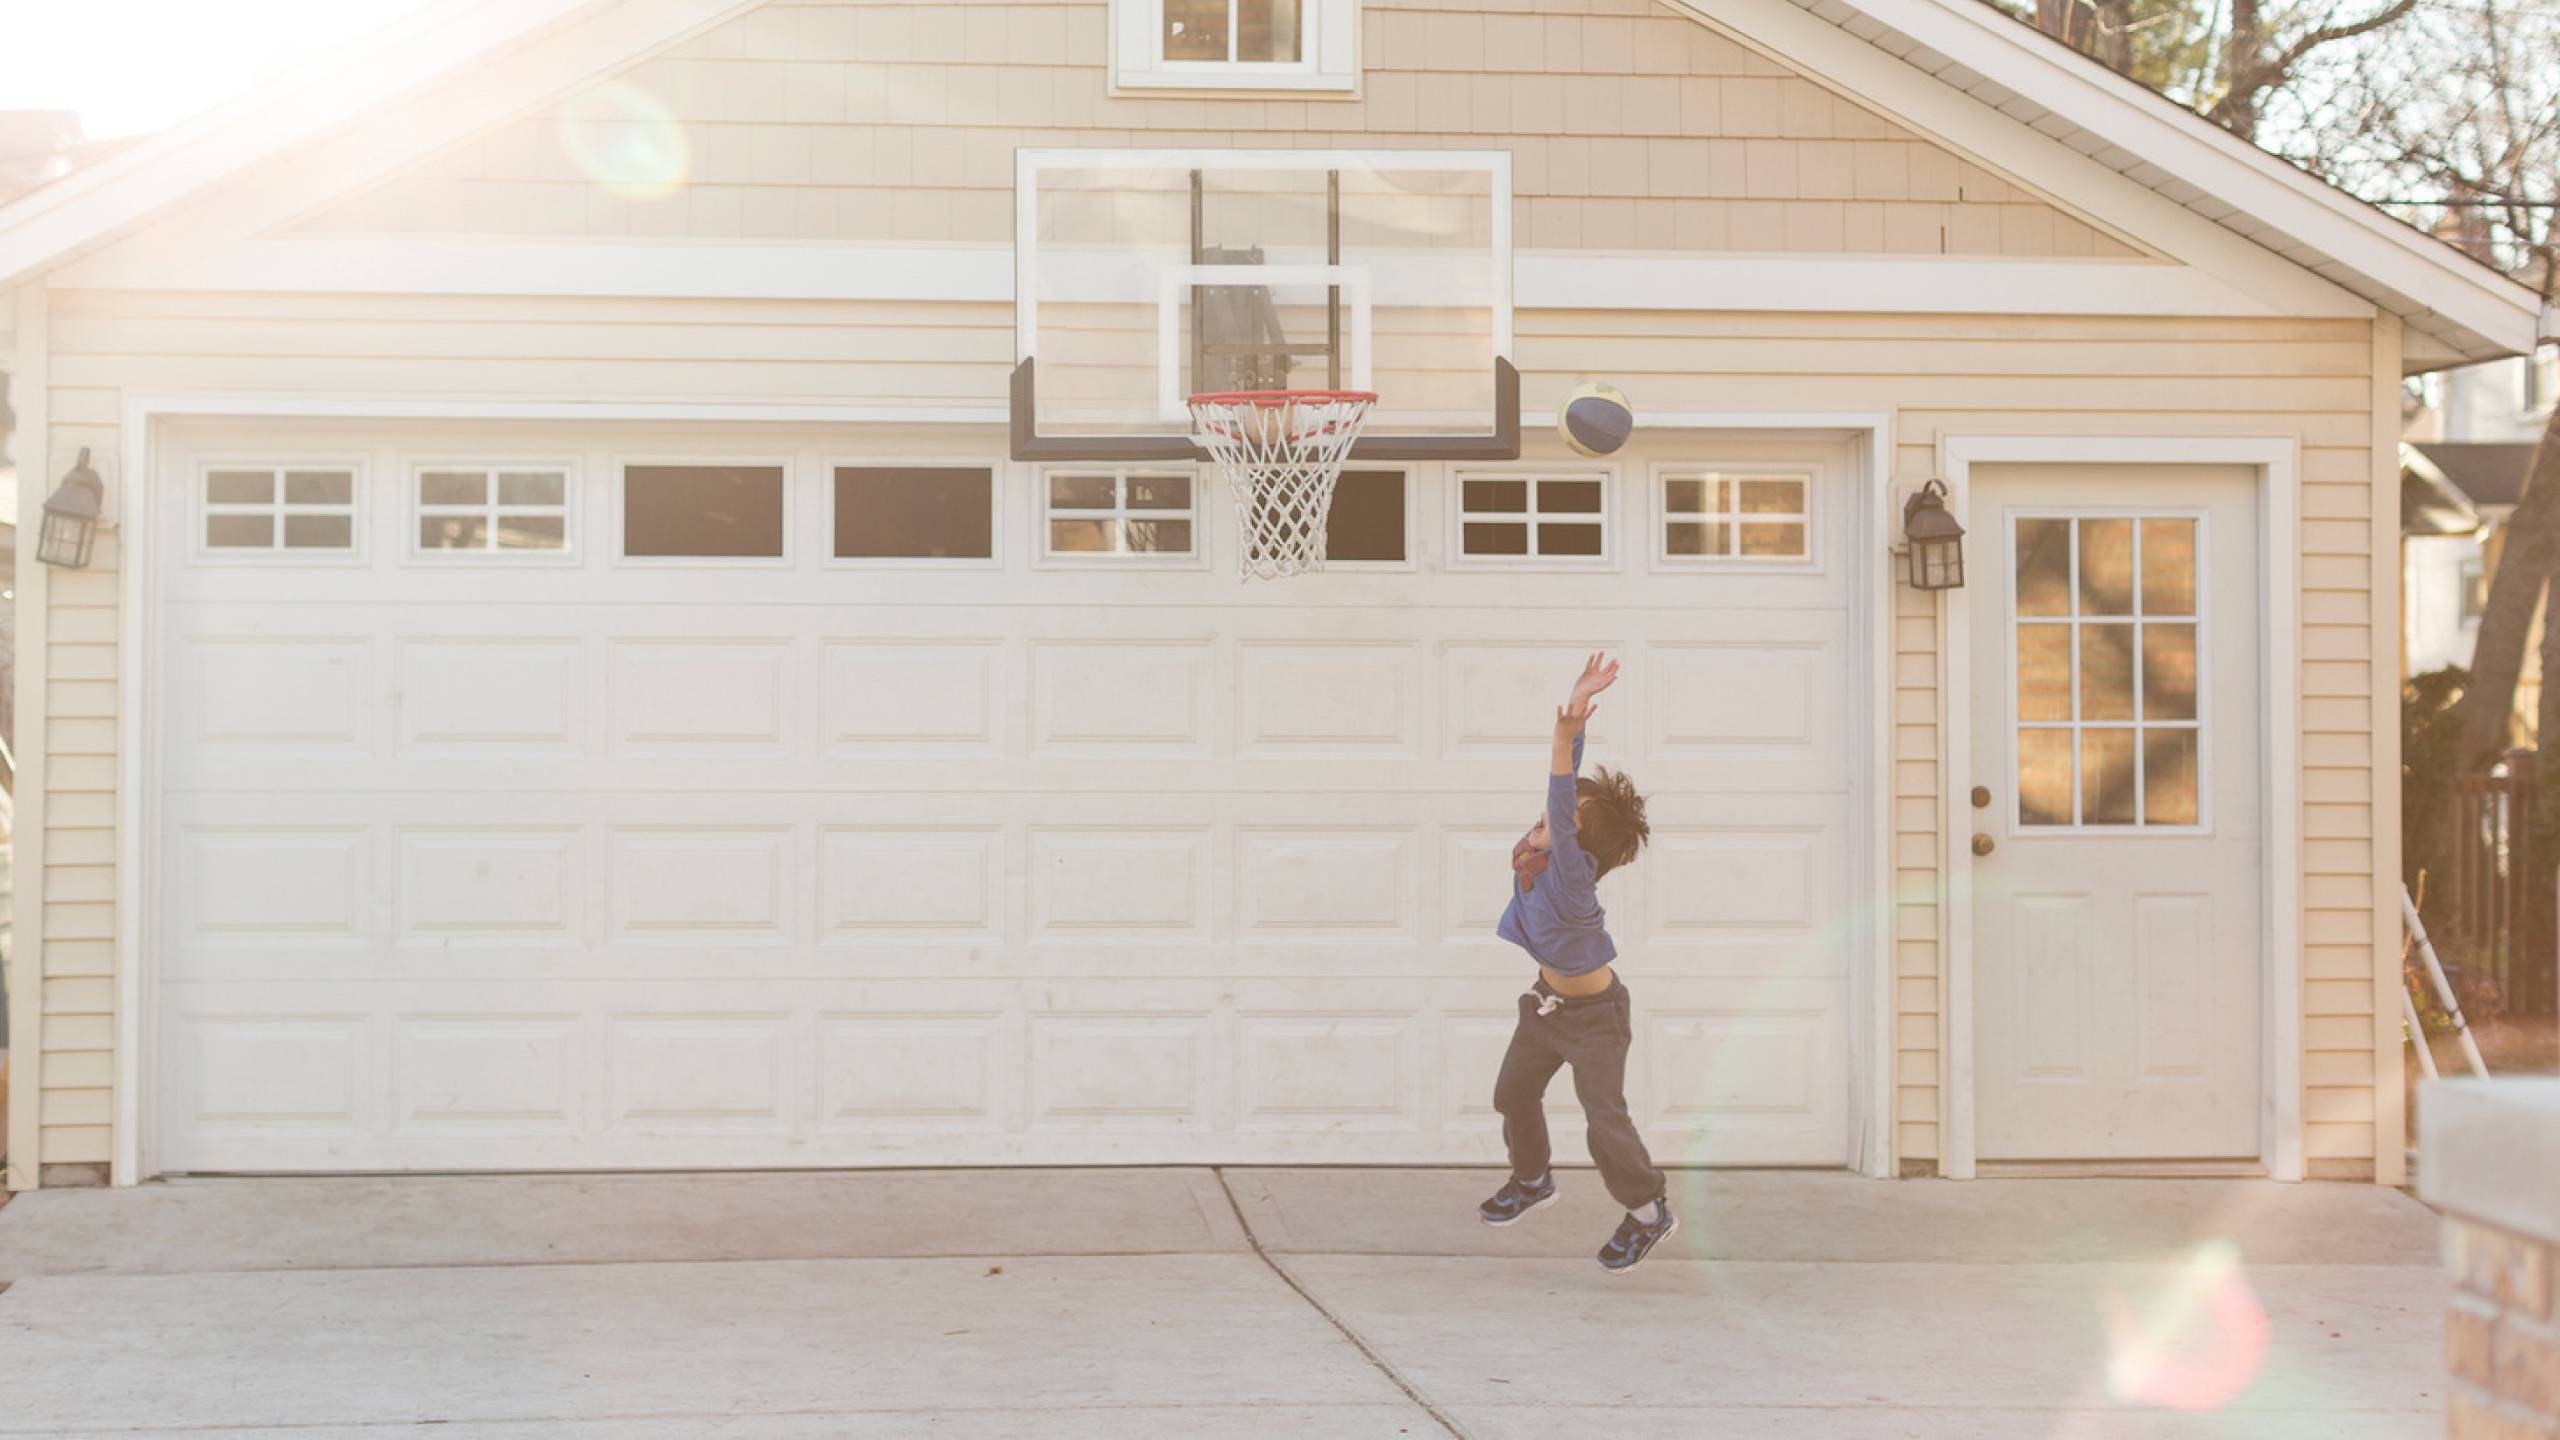 Boy playing basketball outside home in front of garage